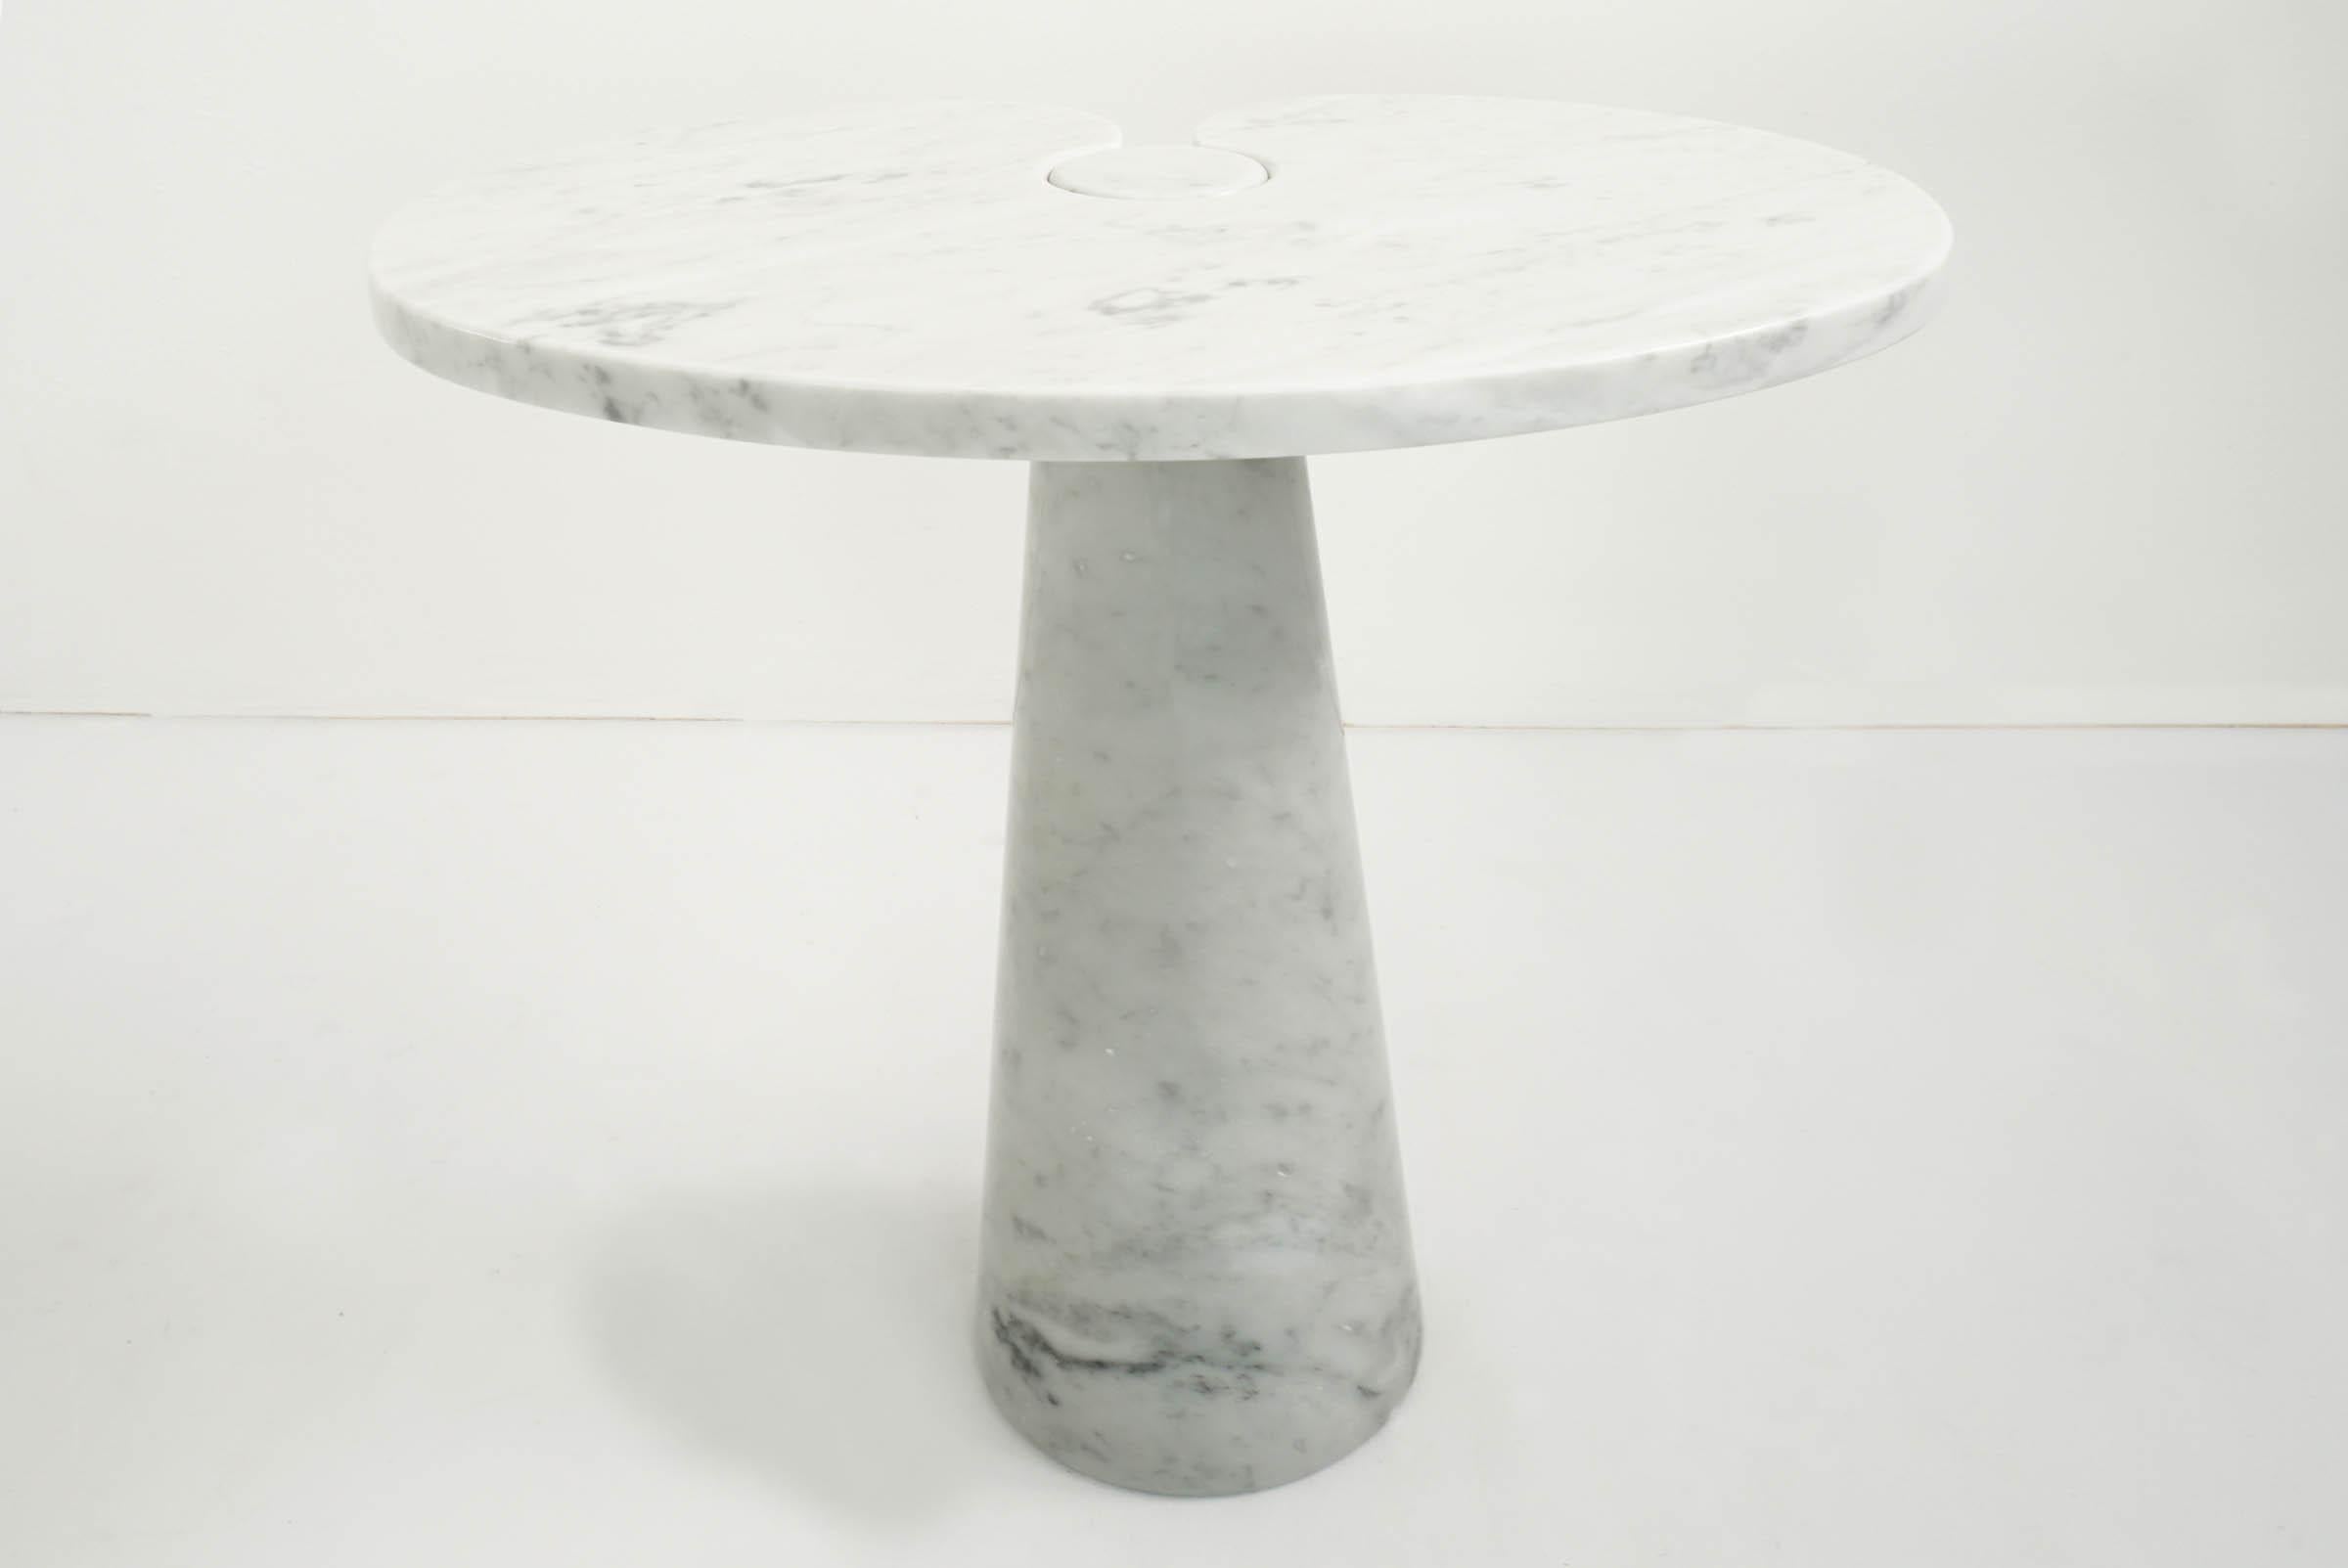 Elegant white Carrara marble in perfect conditiobs.
Skipper, Italy, 1971

Also available a small one cofee or side table.